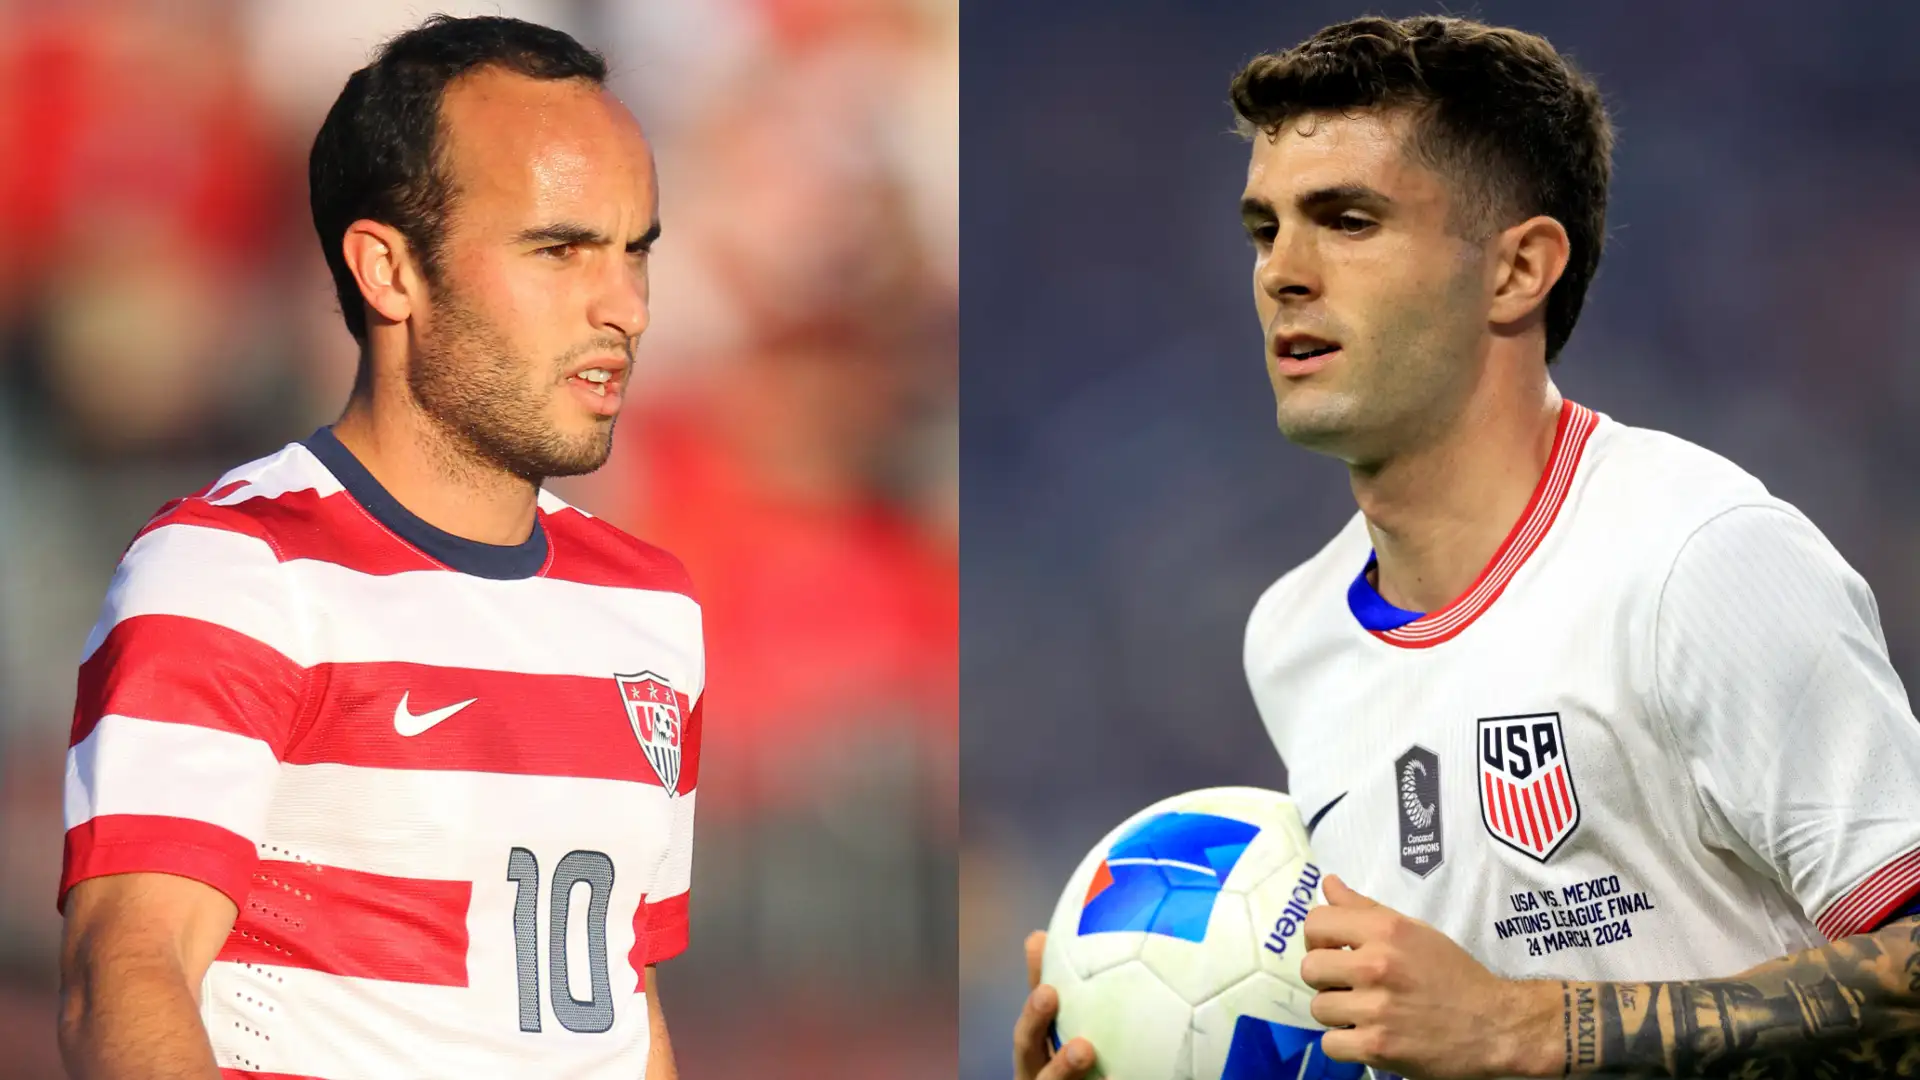 GOAT of the USMNT? Christian Pulisic tipped to become 'better player' than Landon Donovan after posting career bests at AC Milan